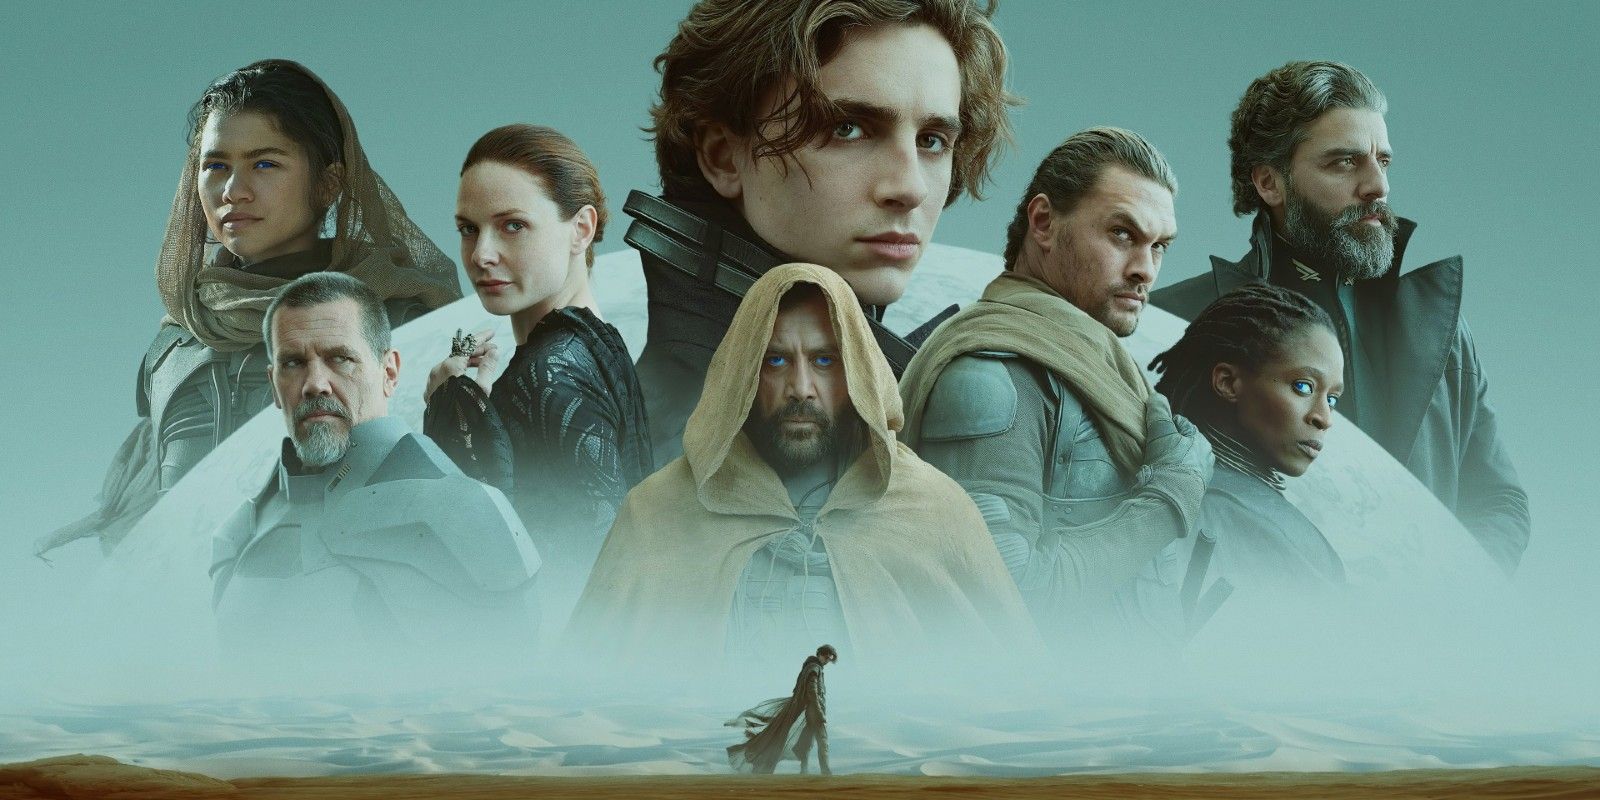 The cast of Dune (2021) on a promotional image for the film